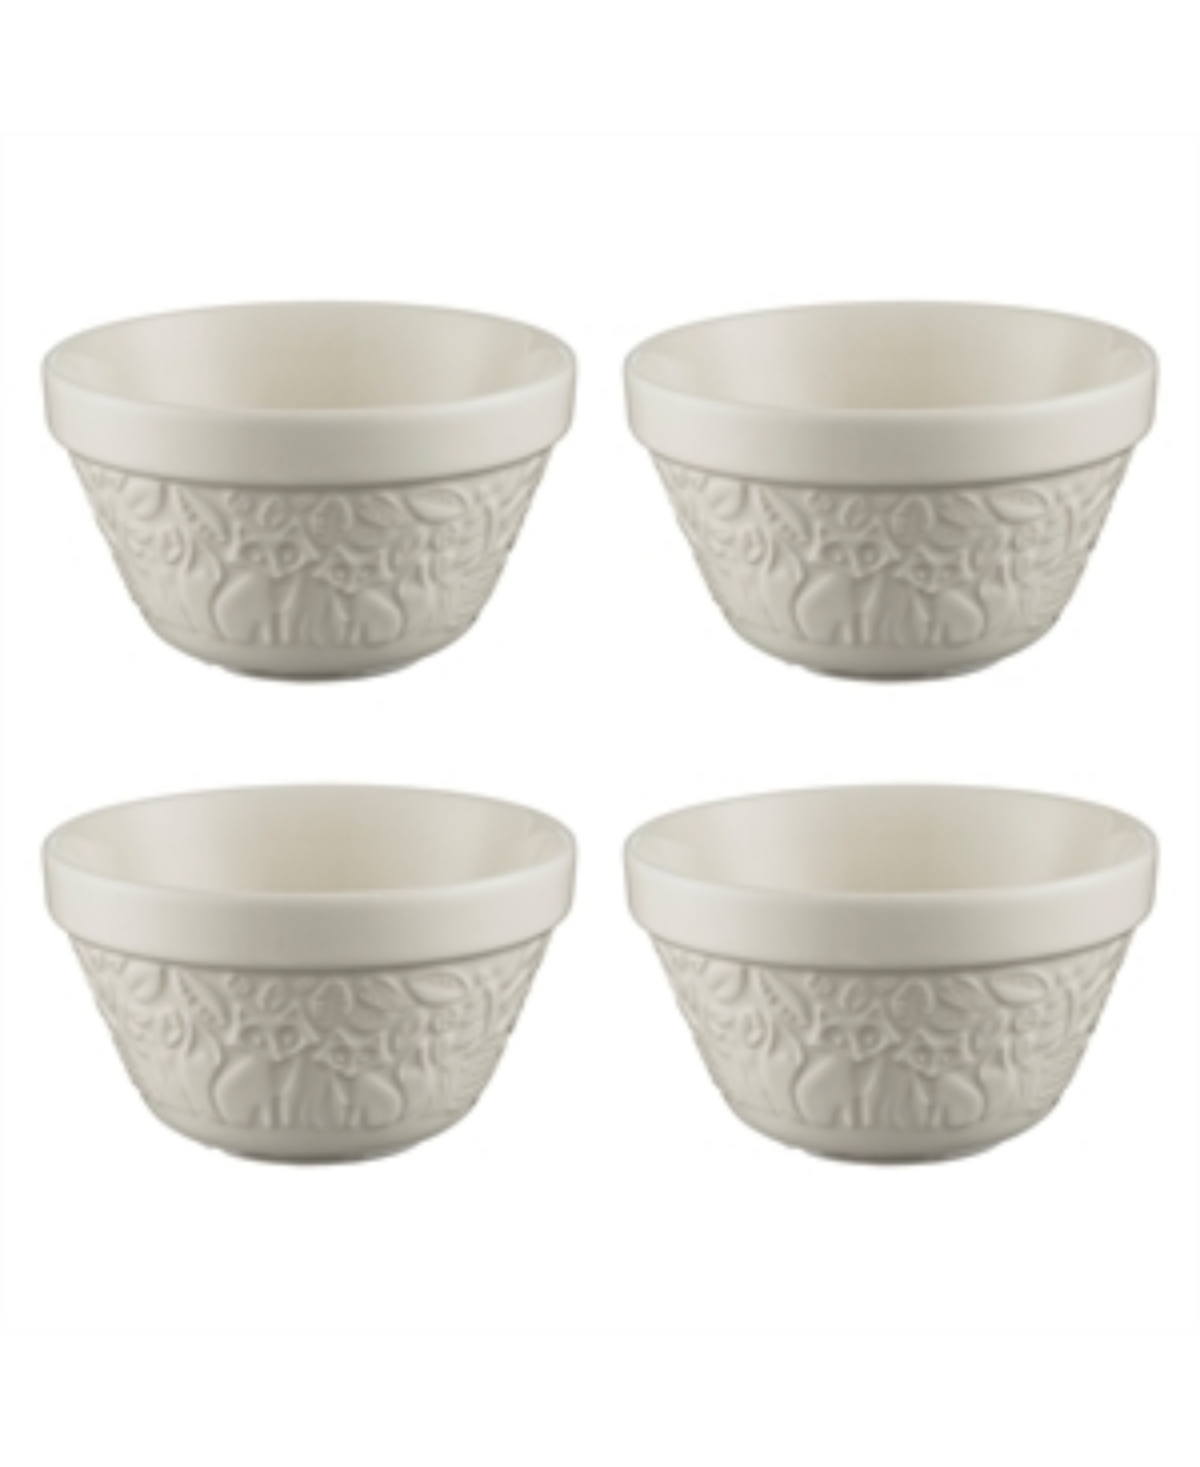 Mason Cash In The Forest All Purpose Bowl, Set Of 4 In Cream